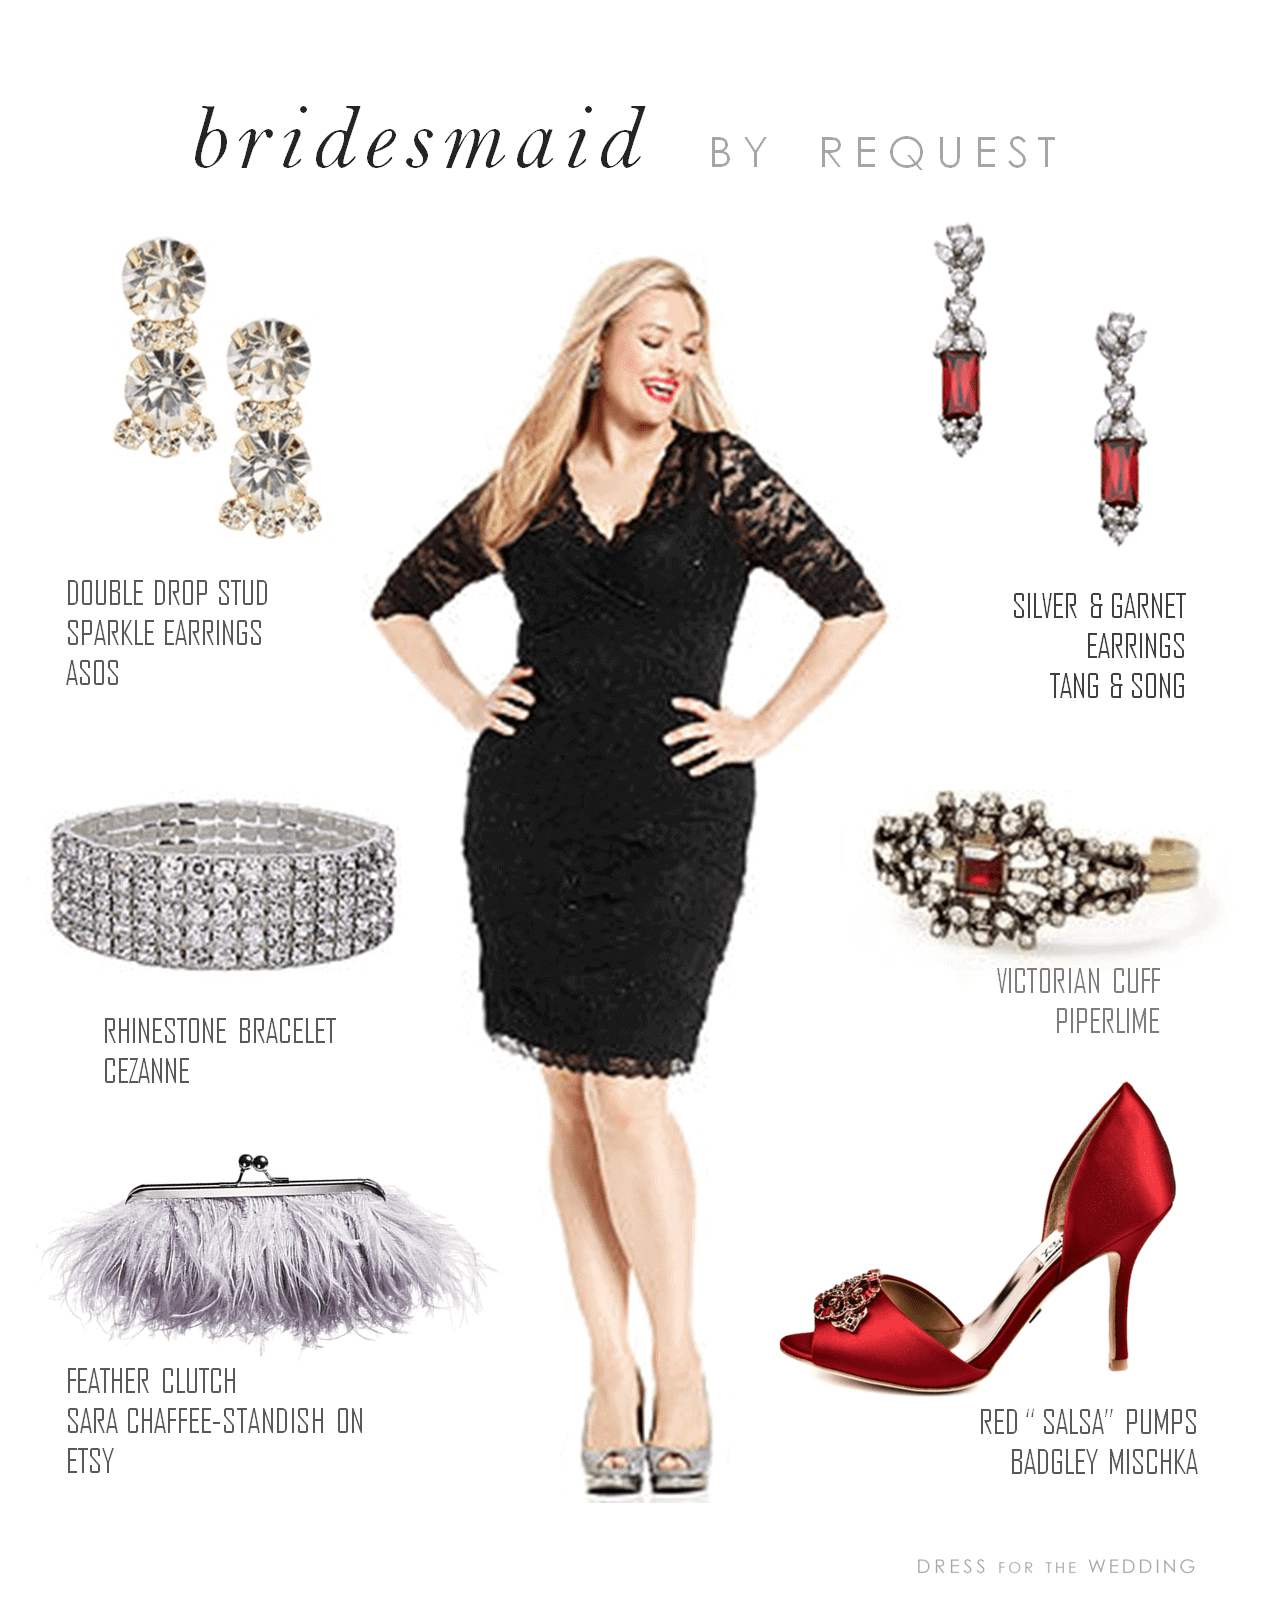 Make a name Passed Insightful Reader Request: Black Cocktail Dress with Red Shoes and Accessories